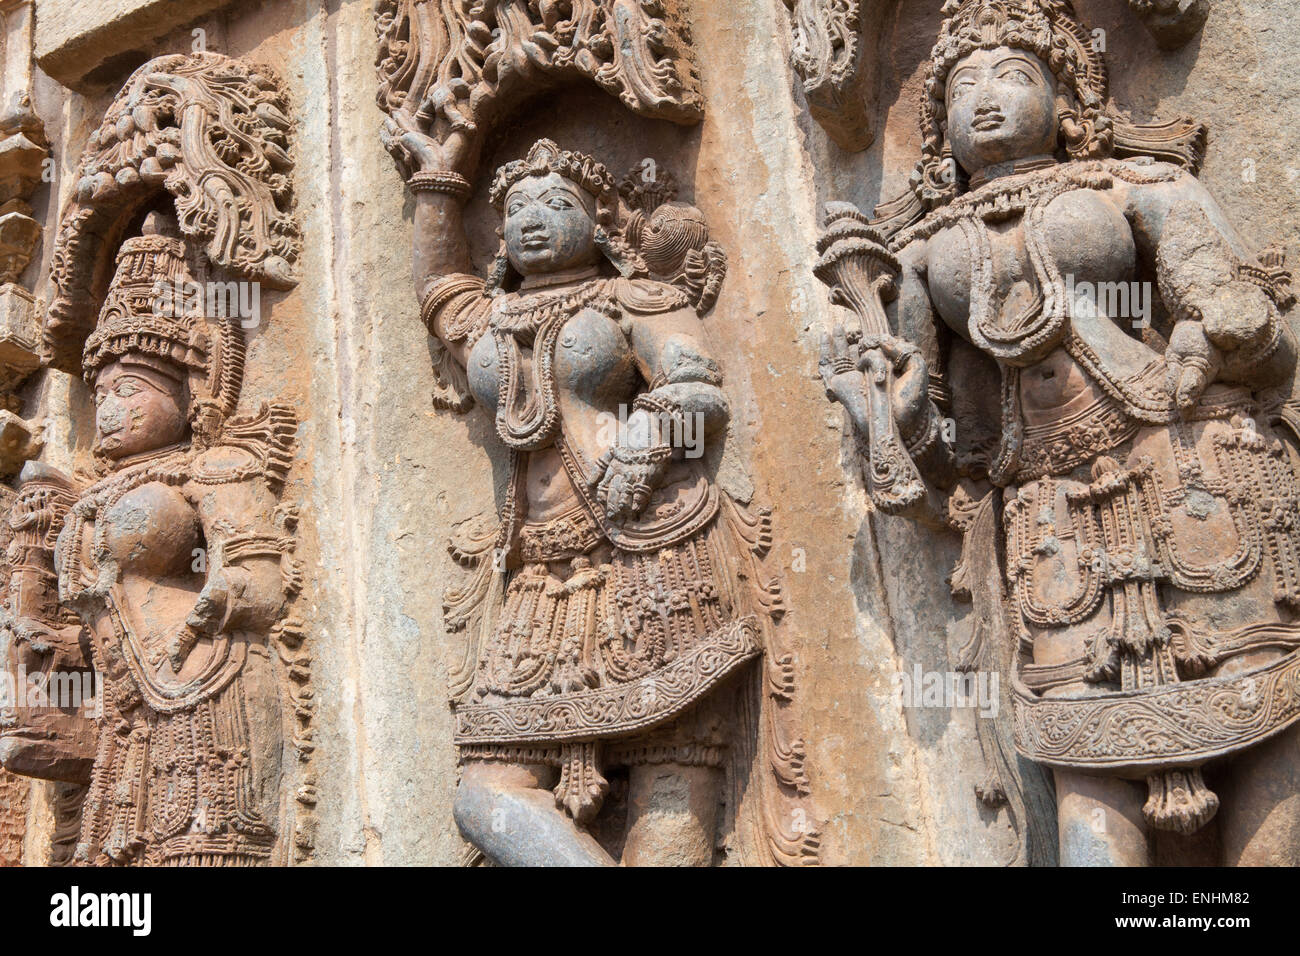 Sculptures and carvings at the Chennakesava Temple in Belur Stock Photo